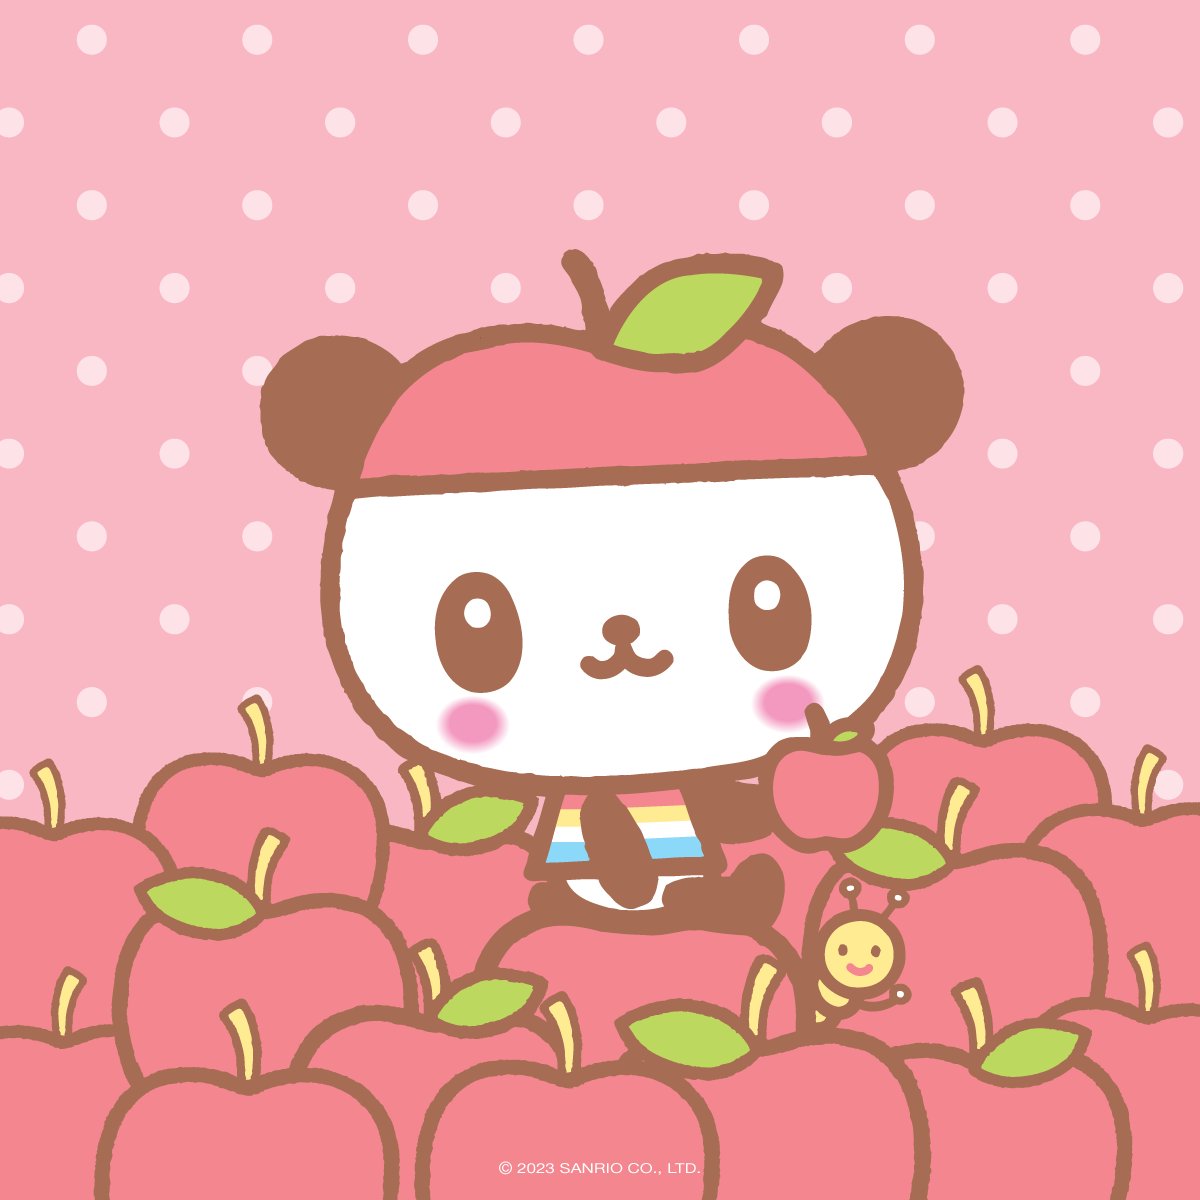 Happy birthday to our sweet friend, #Pandapple! 🐼🍎